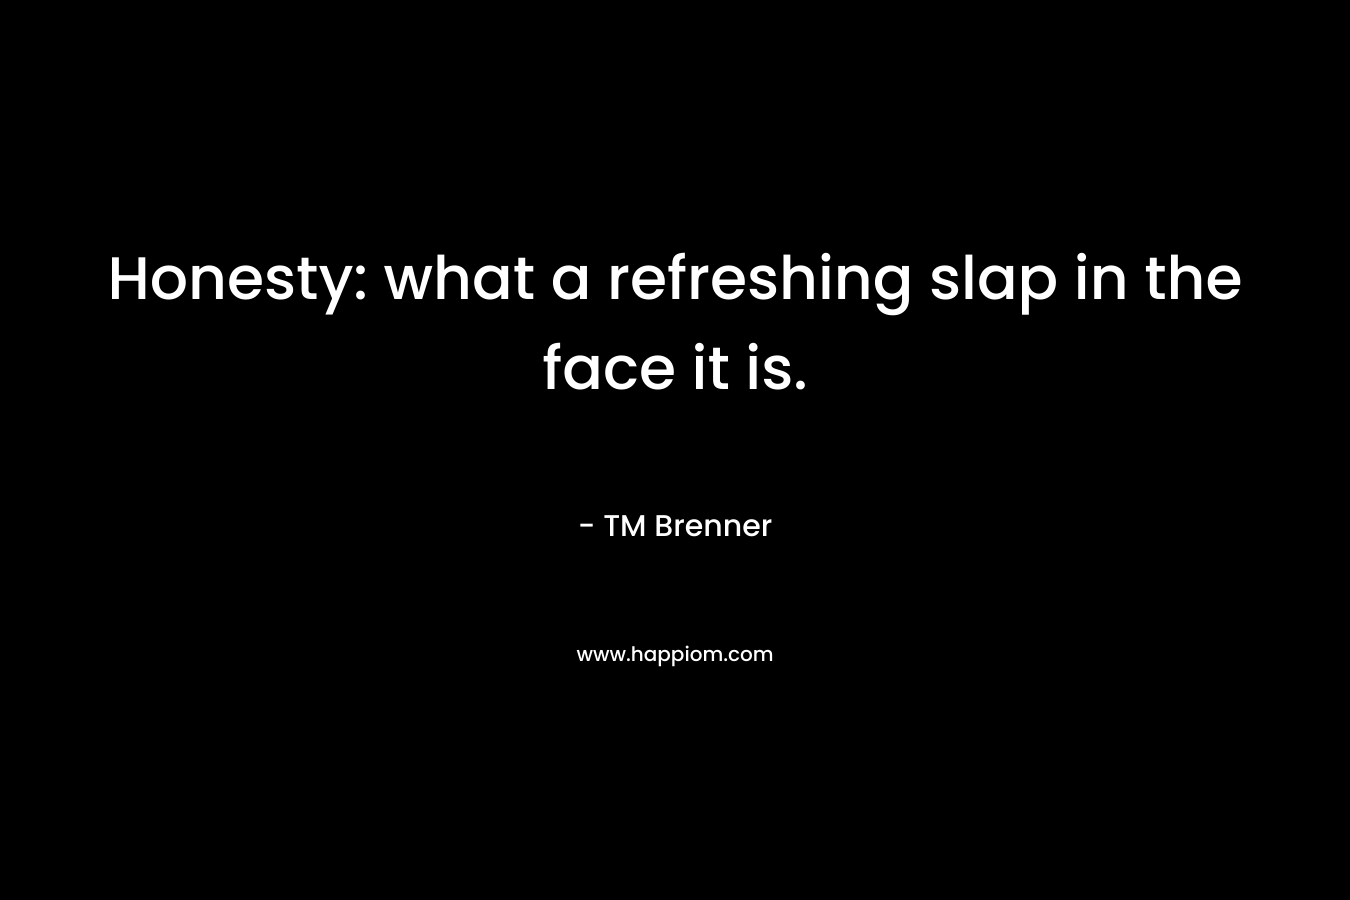 Honesty: what a refreshing slap in the face it is. – TM Brenner